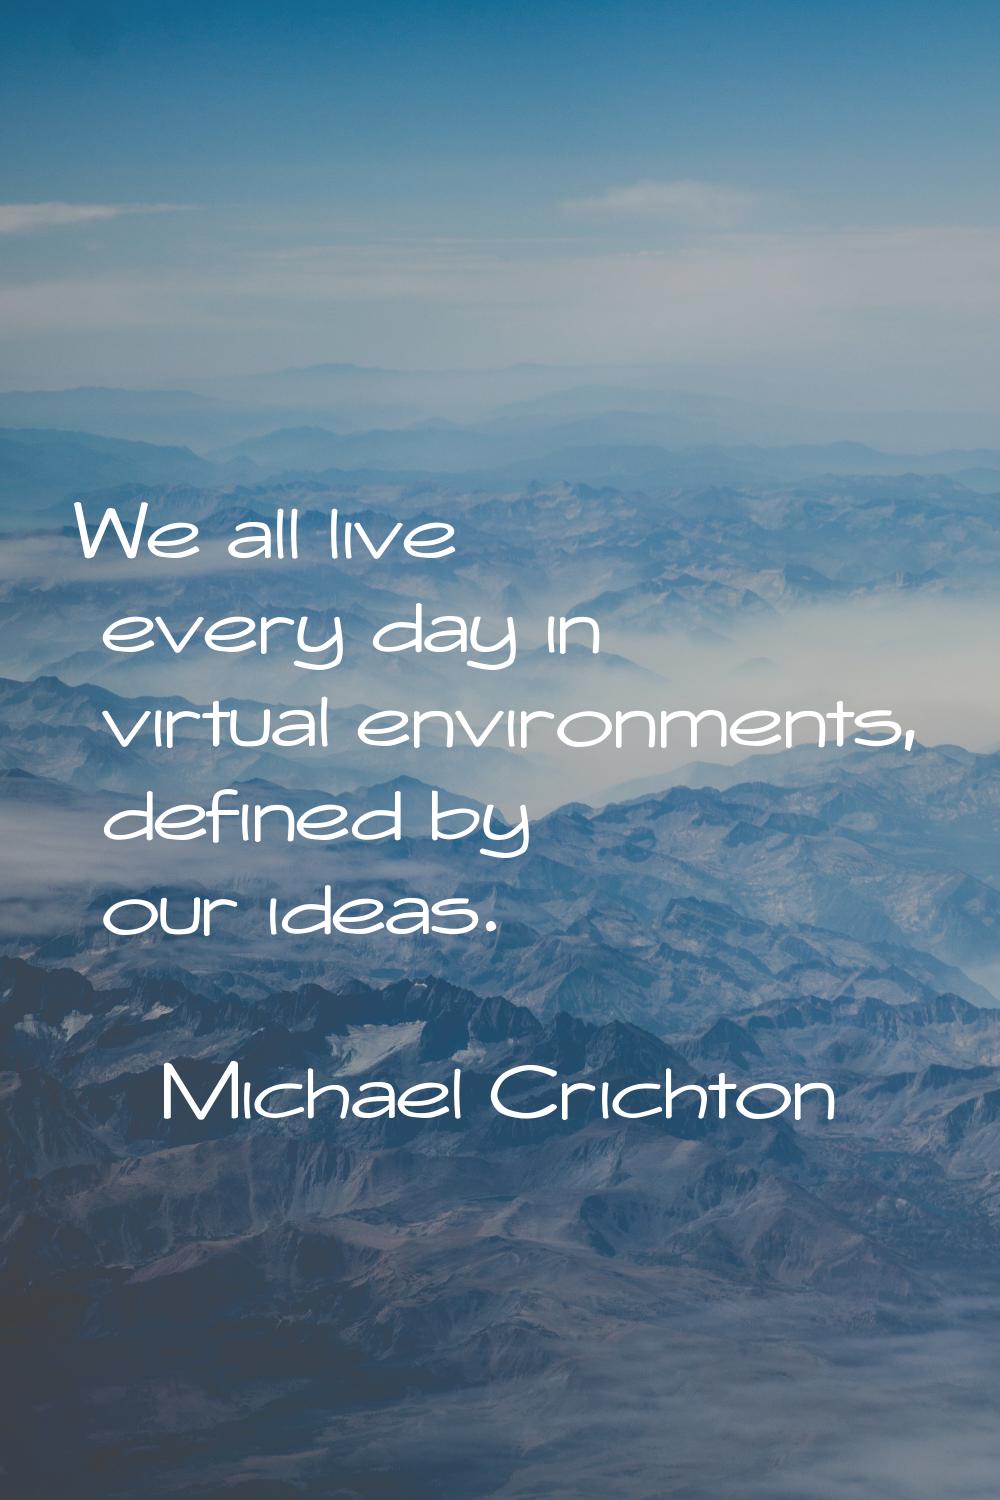 We all live every day in virtual environments, defined by our ideas.